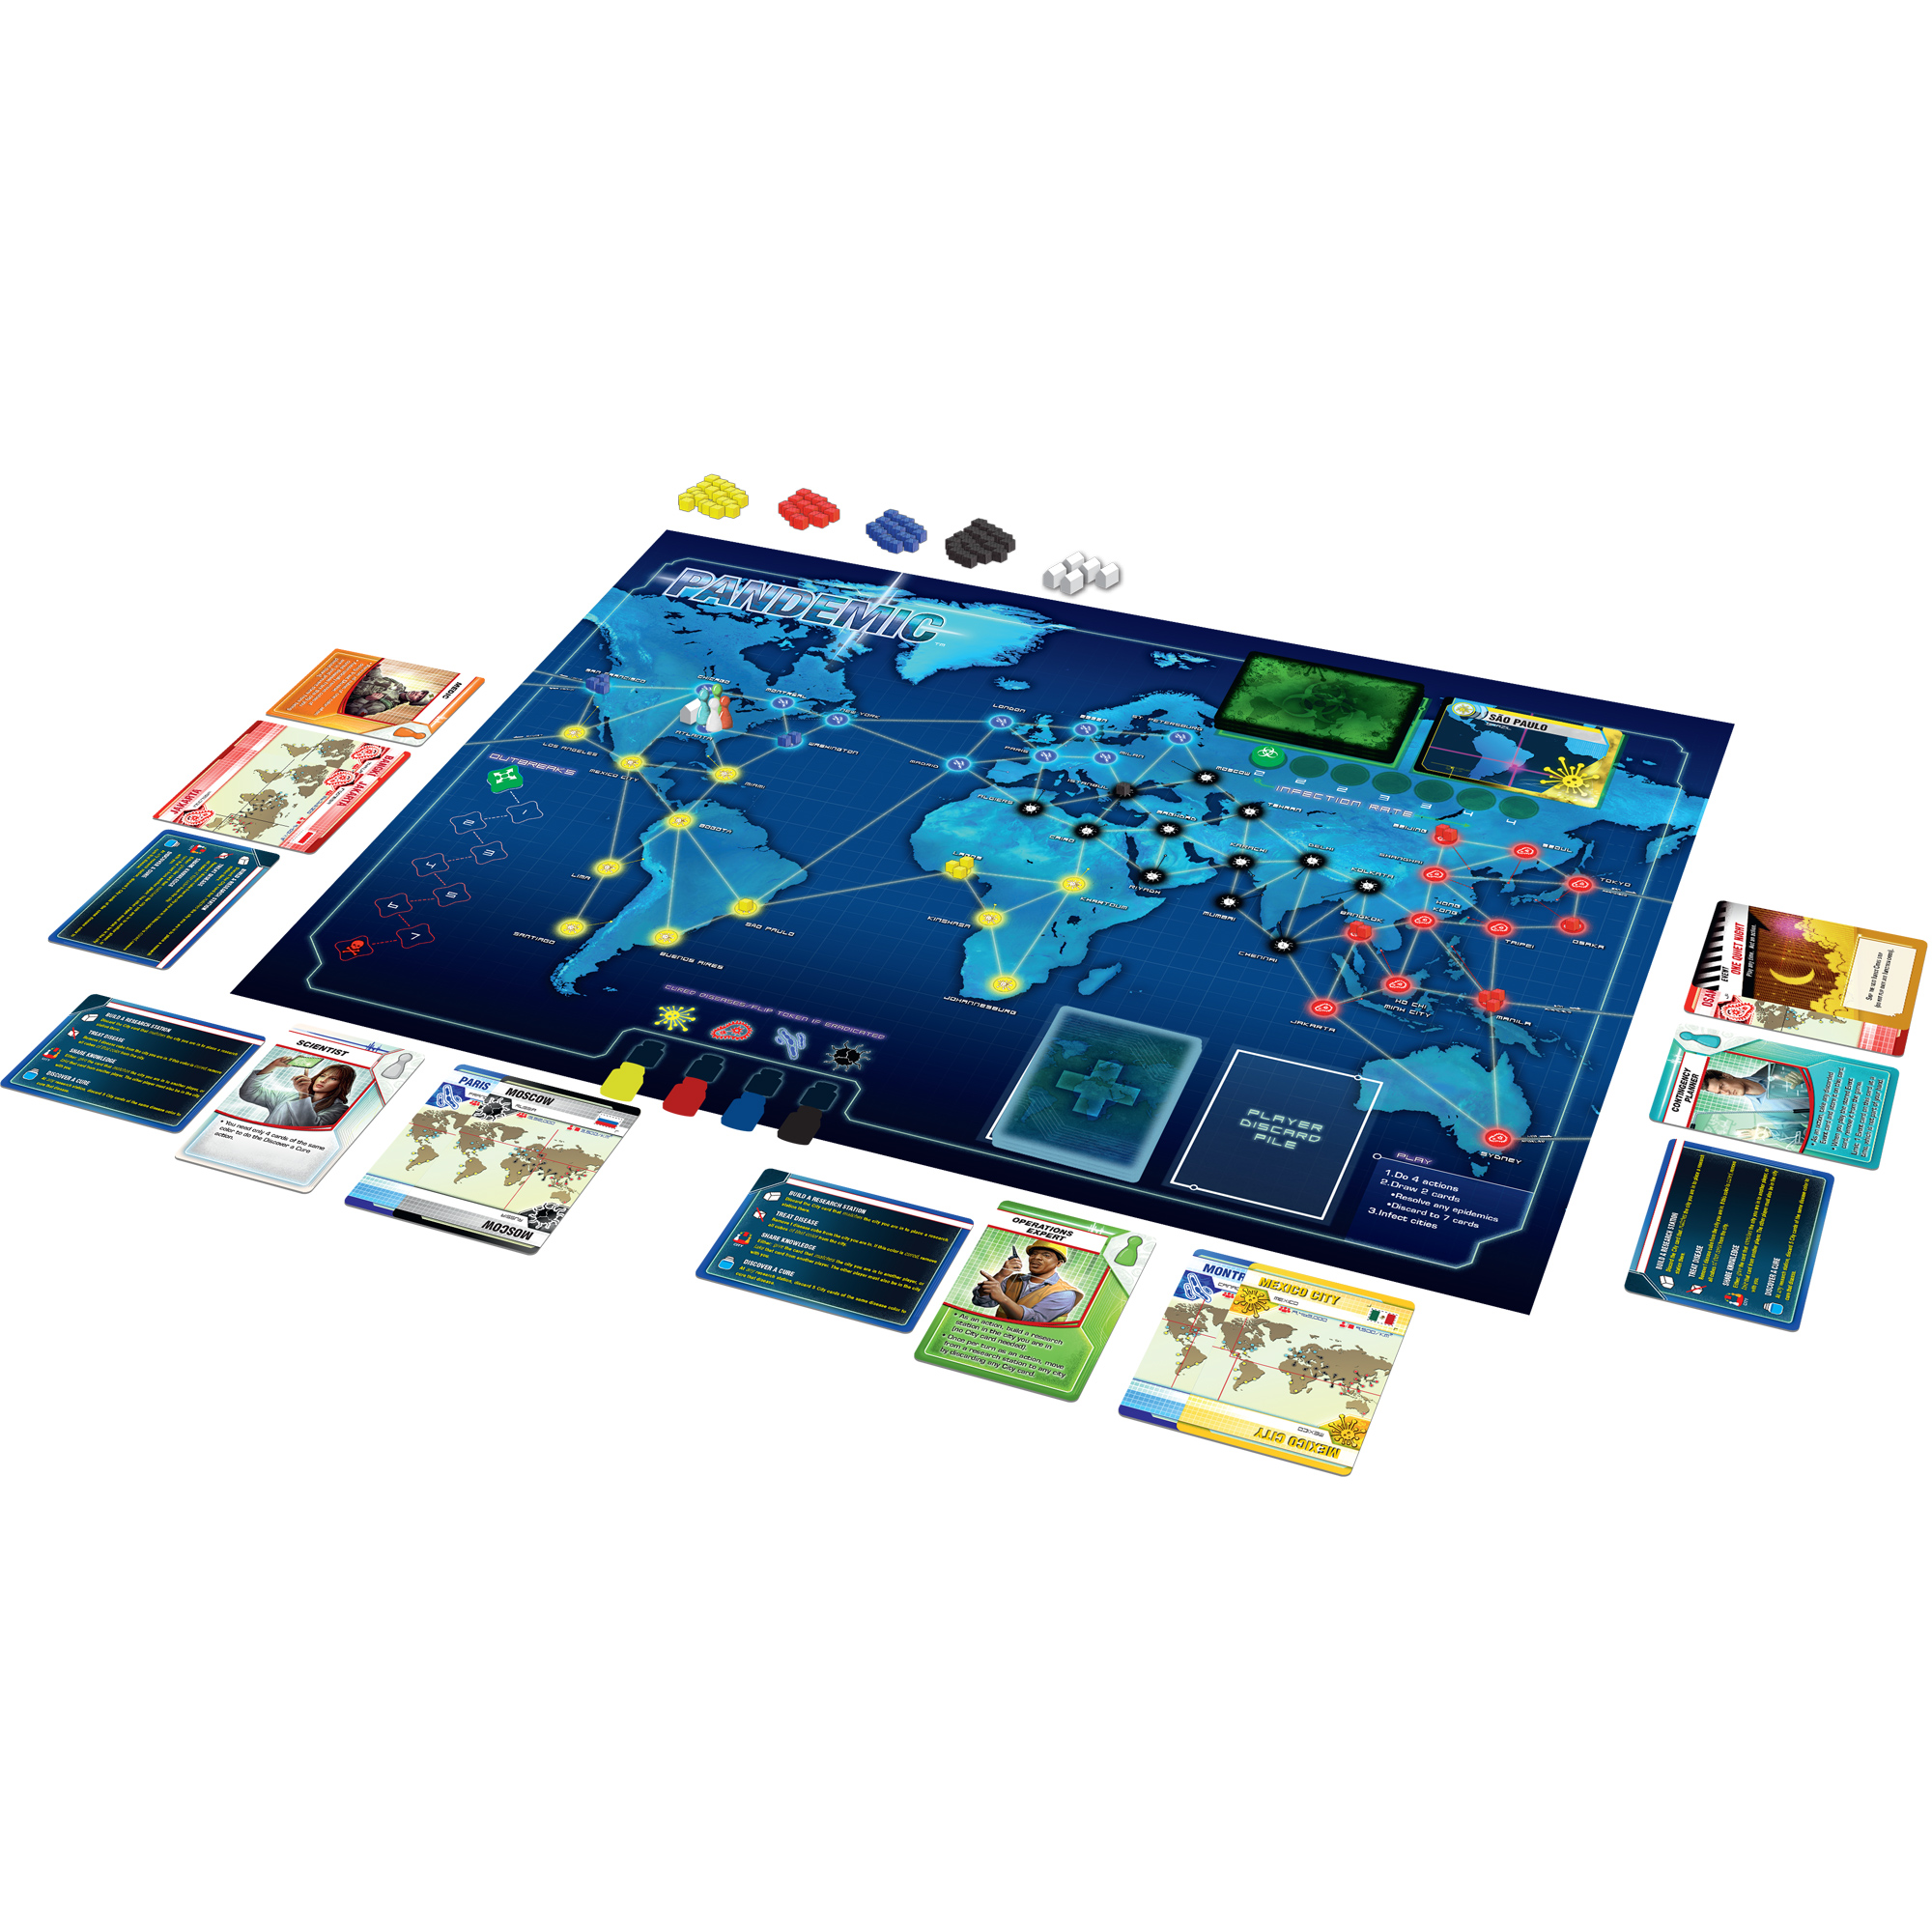 Pandemic Cooperative Board Game - image 8 of 8